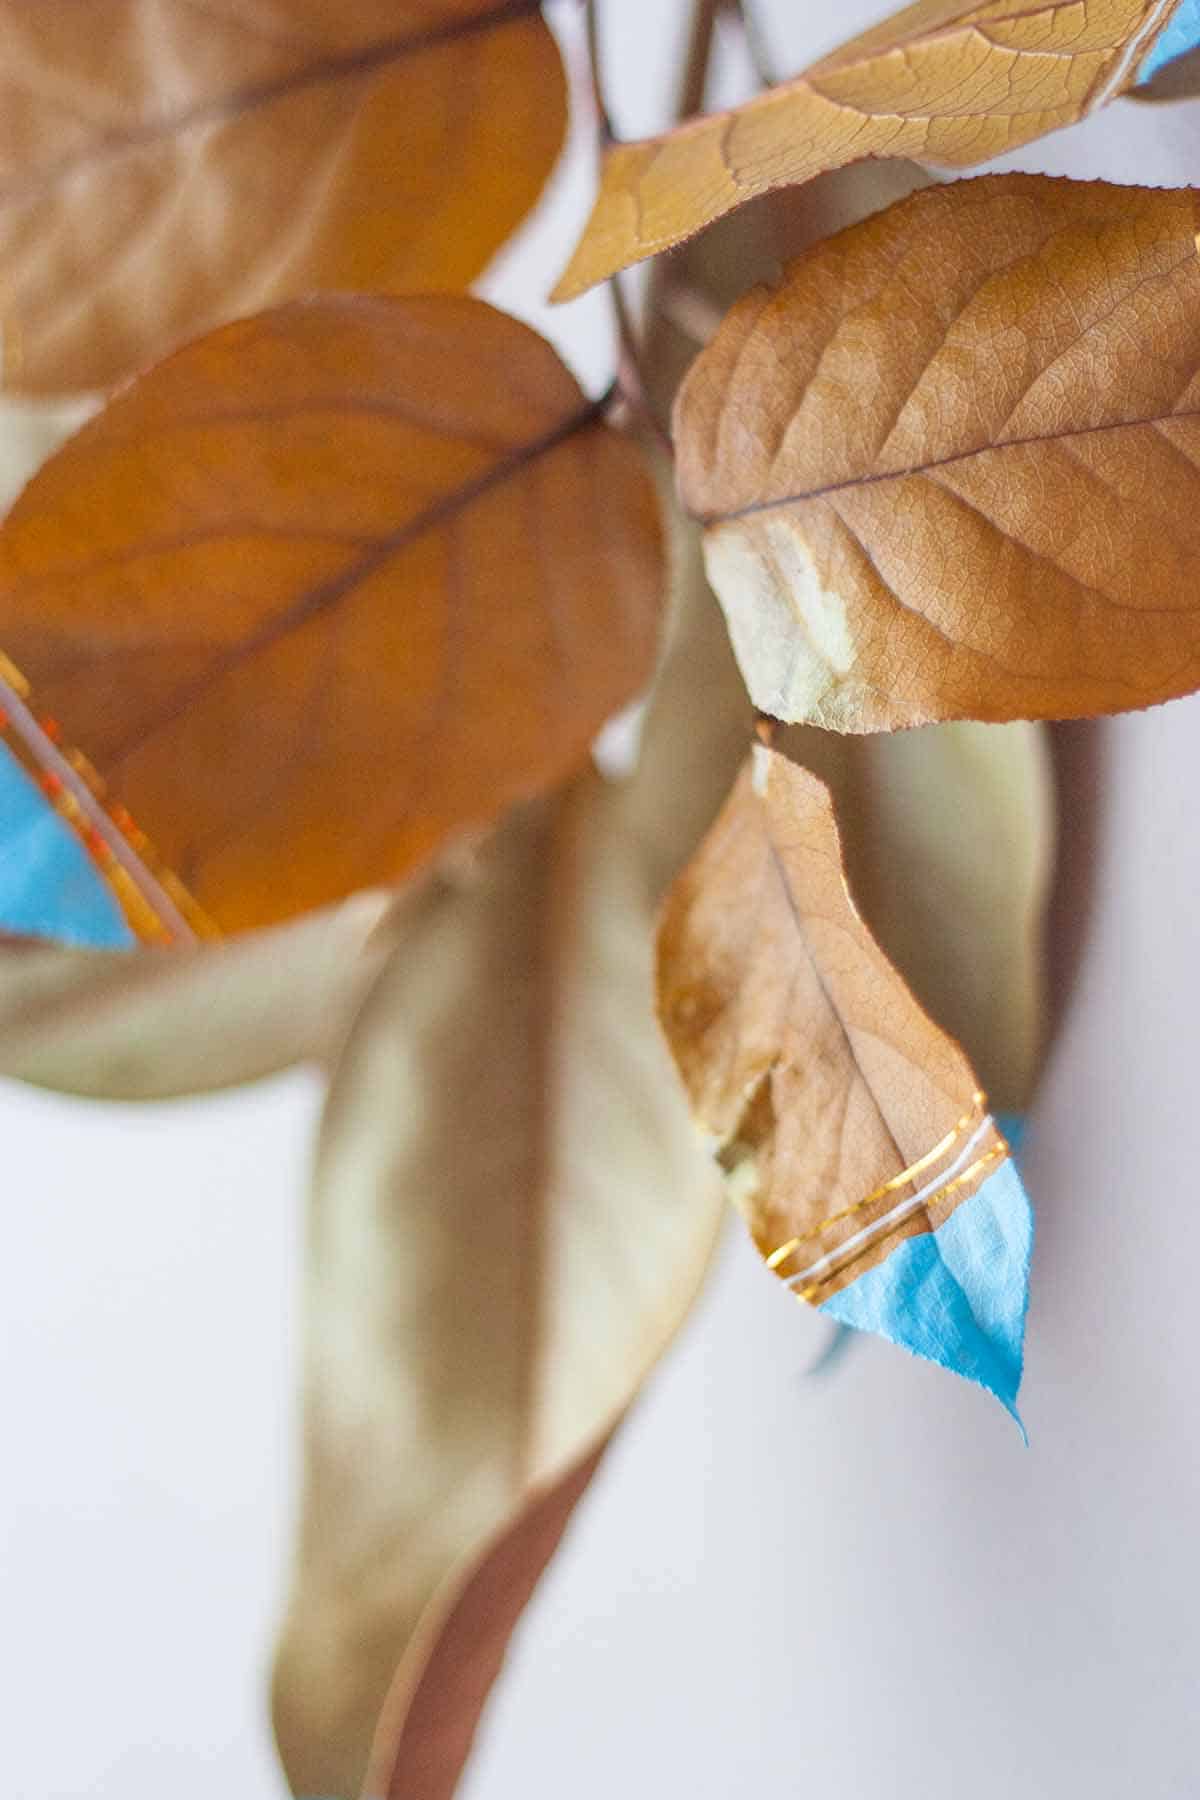 The DIY Fall Wall Hanging Perfect for Renters